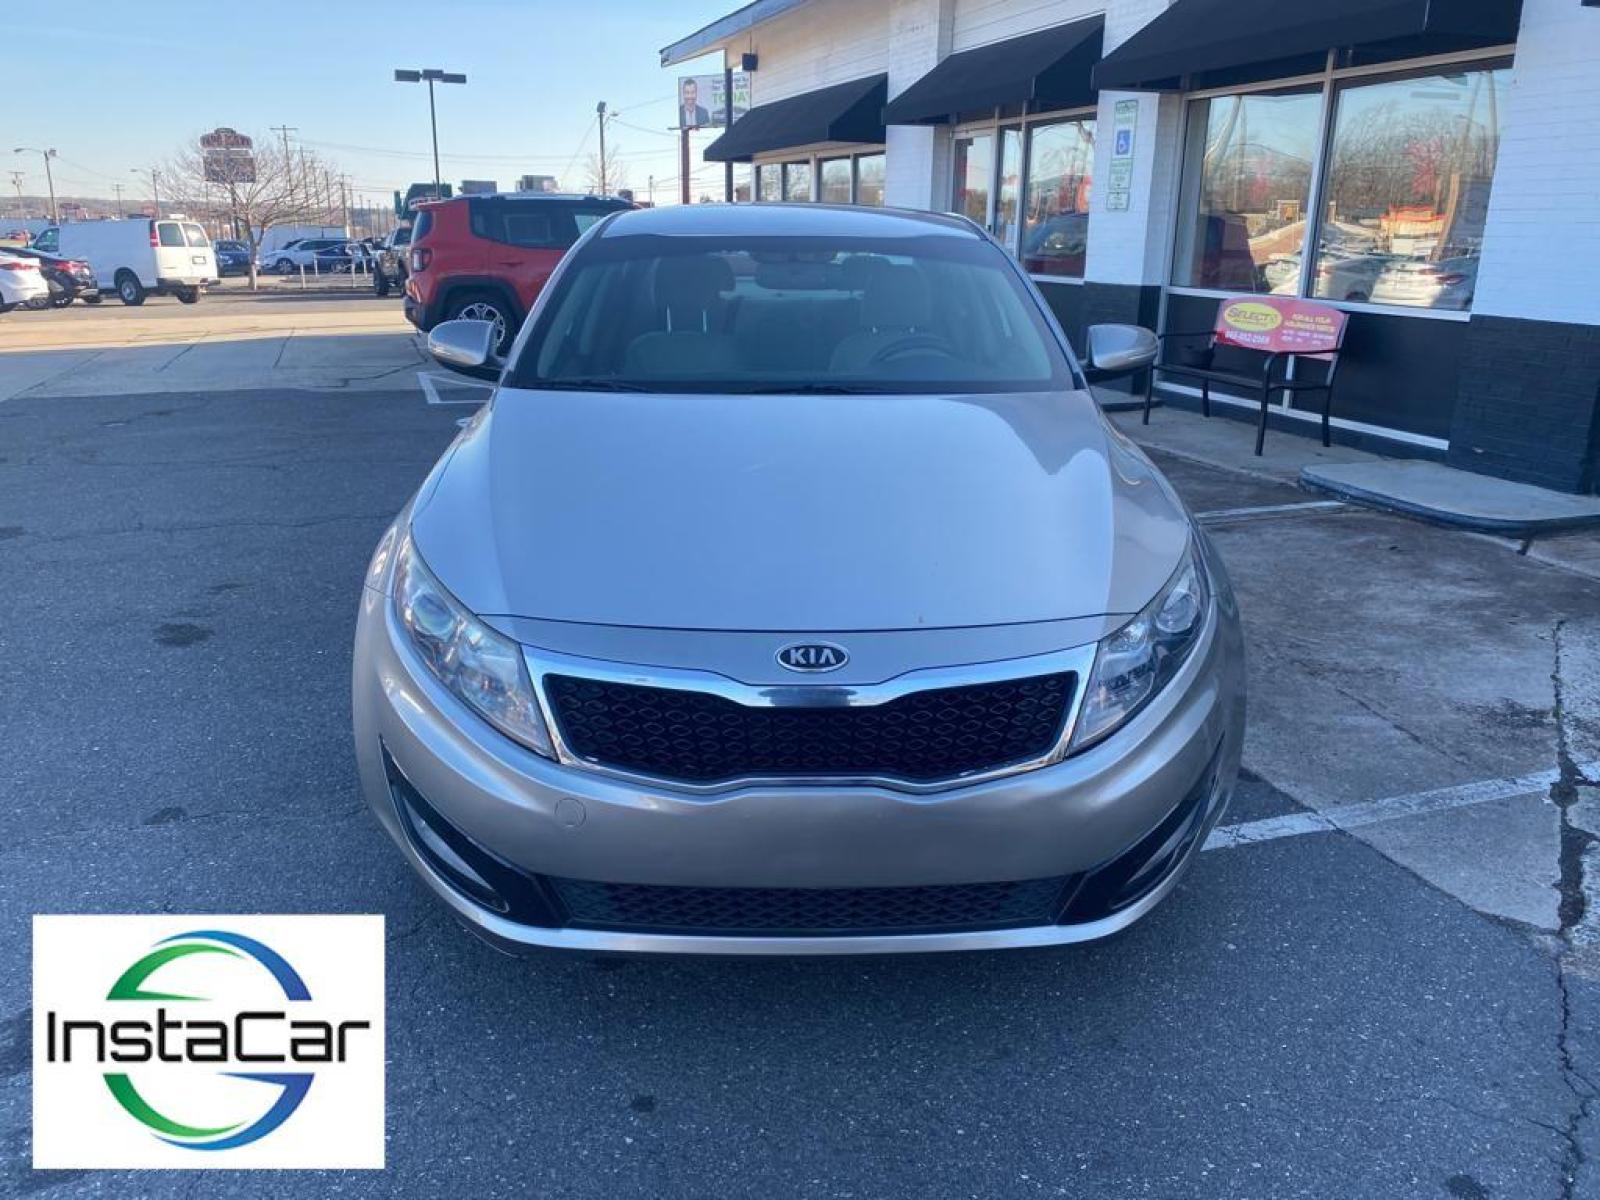 2012 Silver Kia Optima LX (KNAGM4A71C5) with an L4, 2.4L engine, Automatic transmission, located at 3147 E Independence Blvd, Charlotte, NC, 28205, 35.200268, -80.773651 - <b>Equipment</b><br>The Kia Optima features a hands-free Bluetooth phone system. This Kia Optima has satellite radio capabilities. This unit gleams with an elegant silver clear coated finish. Front wheel drive on the Kia Optima gives you better traction and better fuel economy. This mid-size car has - Photo #0